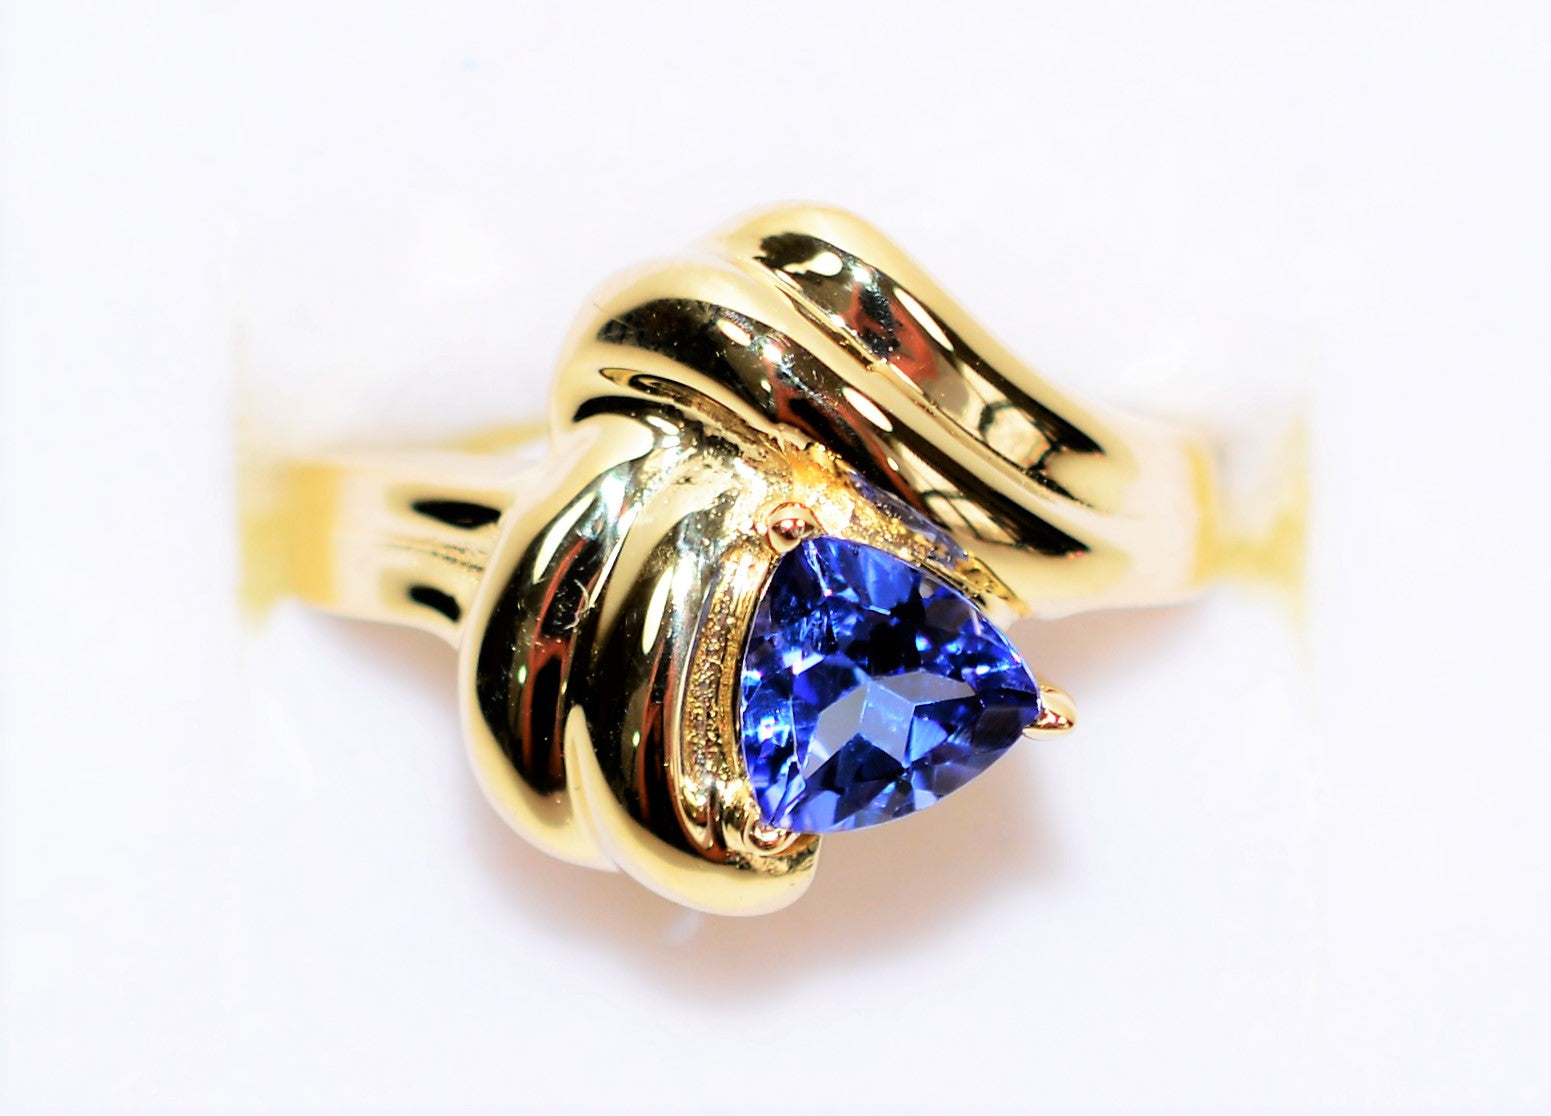 Natural Tanzanite Ring 14K Solid Gold .73ct Solitaire Ring Gemstone Ring Vintage Ring Estate Ring December Birthstone Ring Jewellery Jewelry